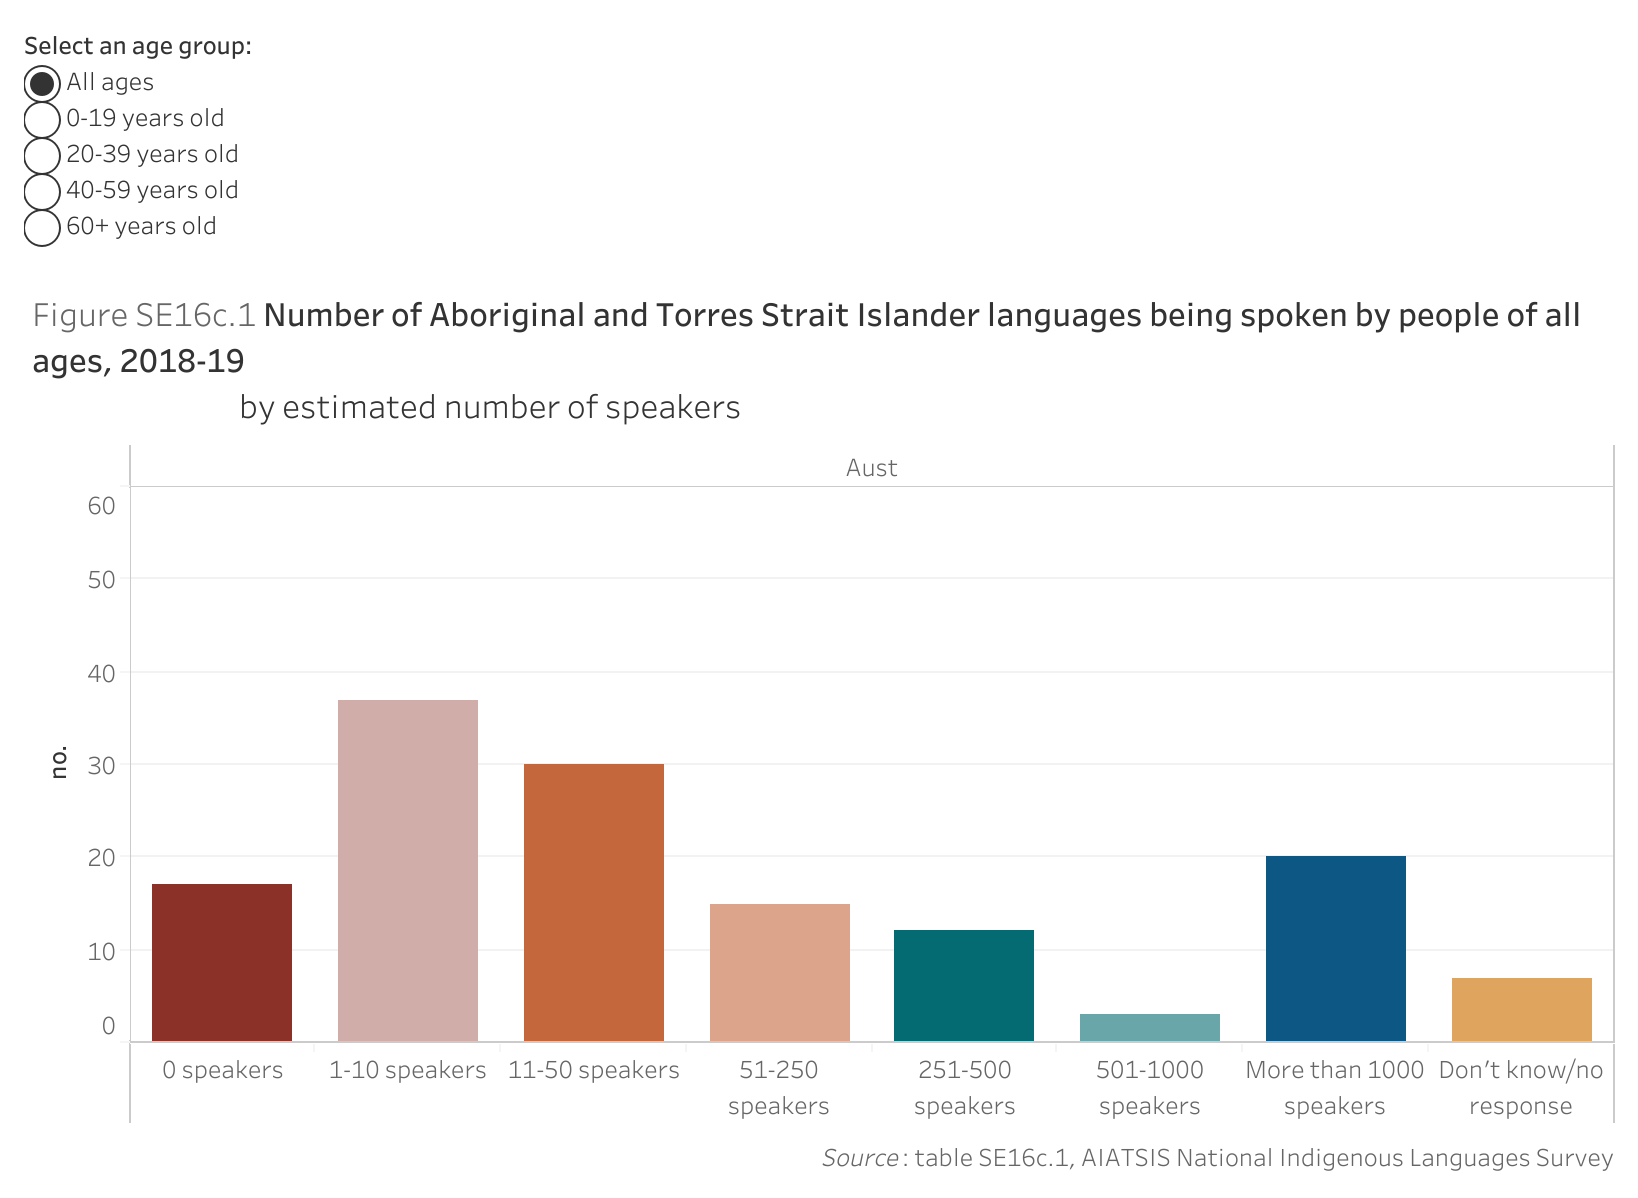 Figure SE16c.1 shows the number of Aboriginal and Torres Strait Islander languages being spoken by people of all ages, 2018-19, by estimated number of speakers. More details can be found within the text near this image.